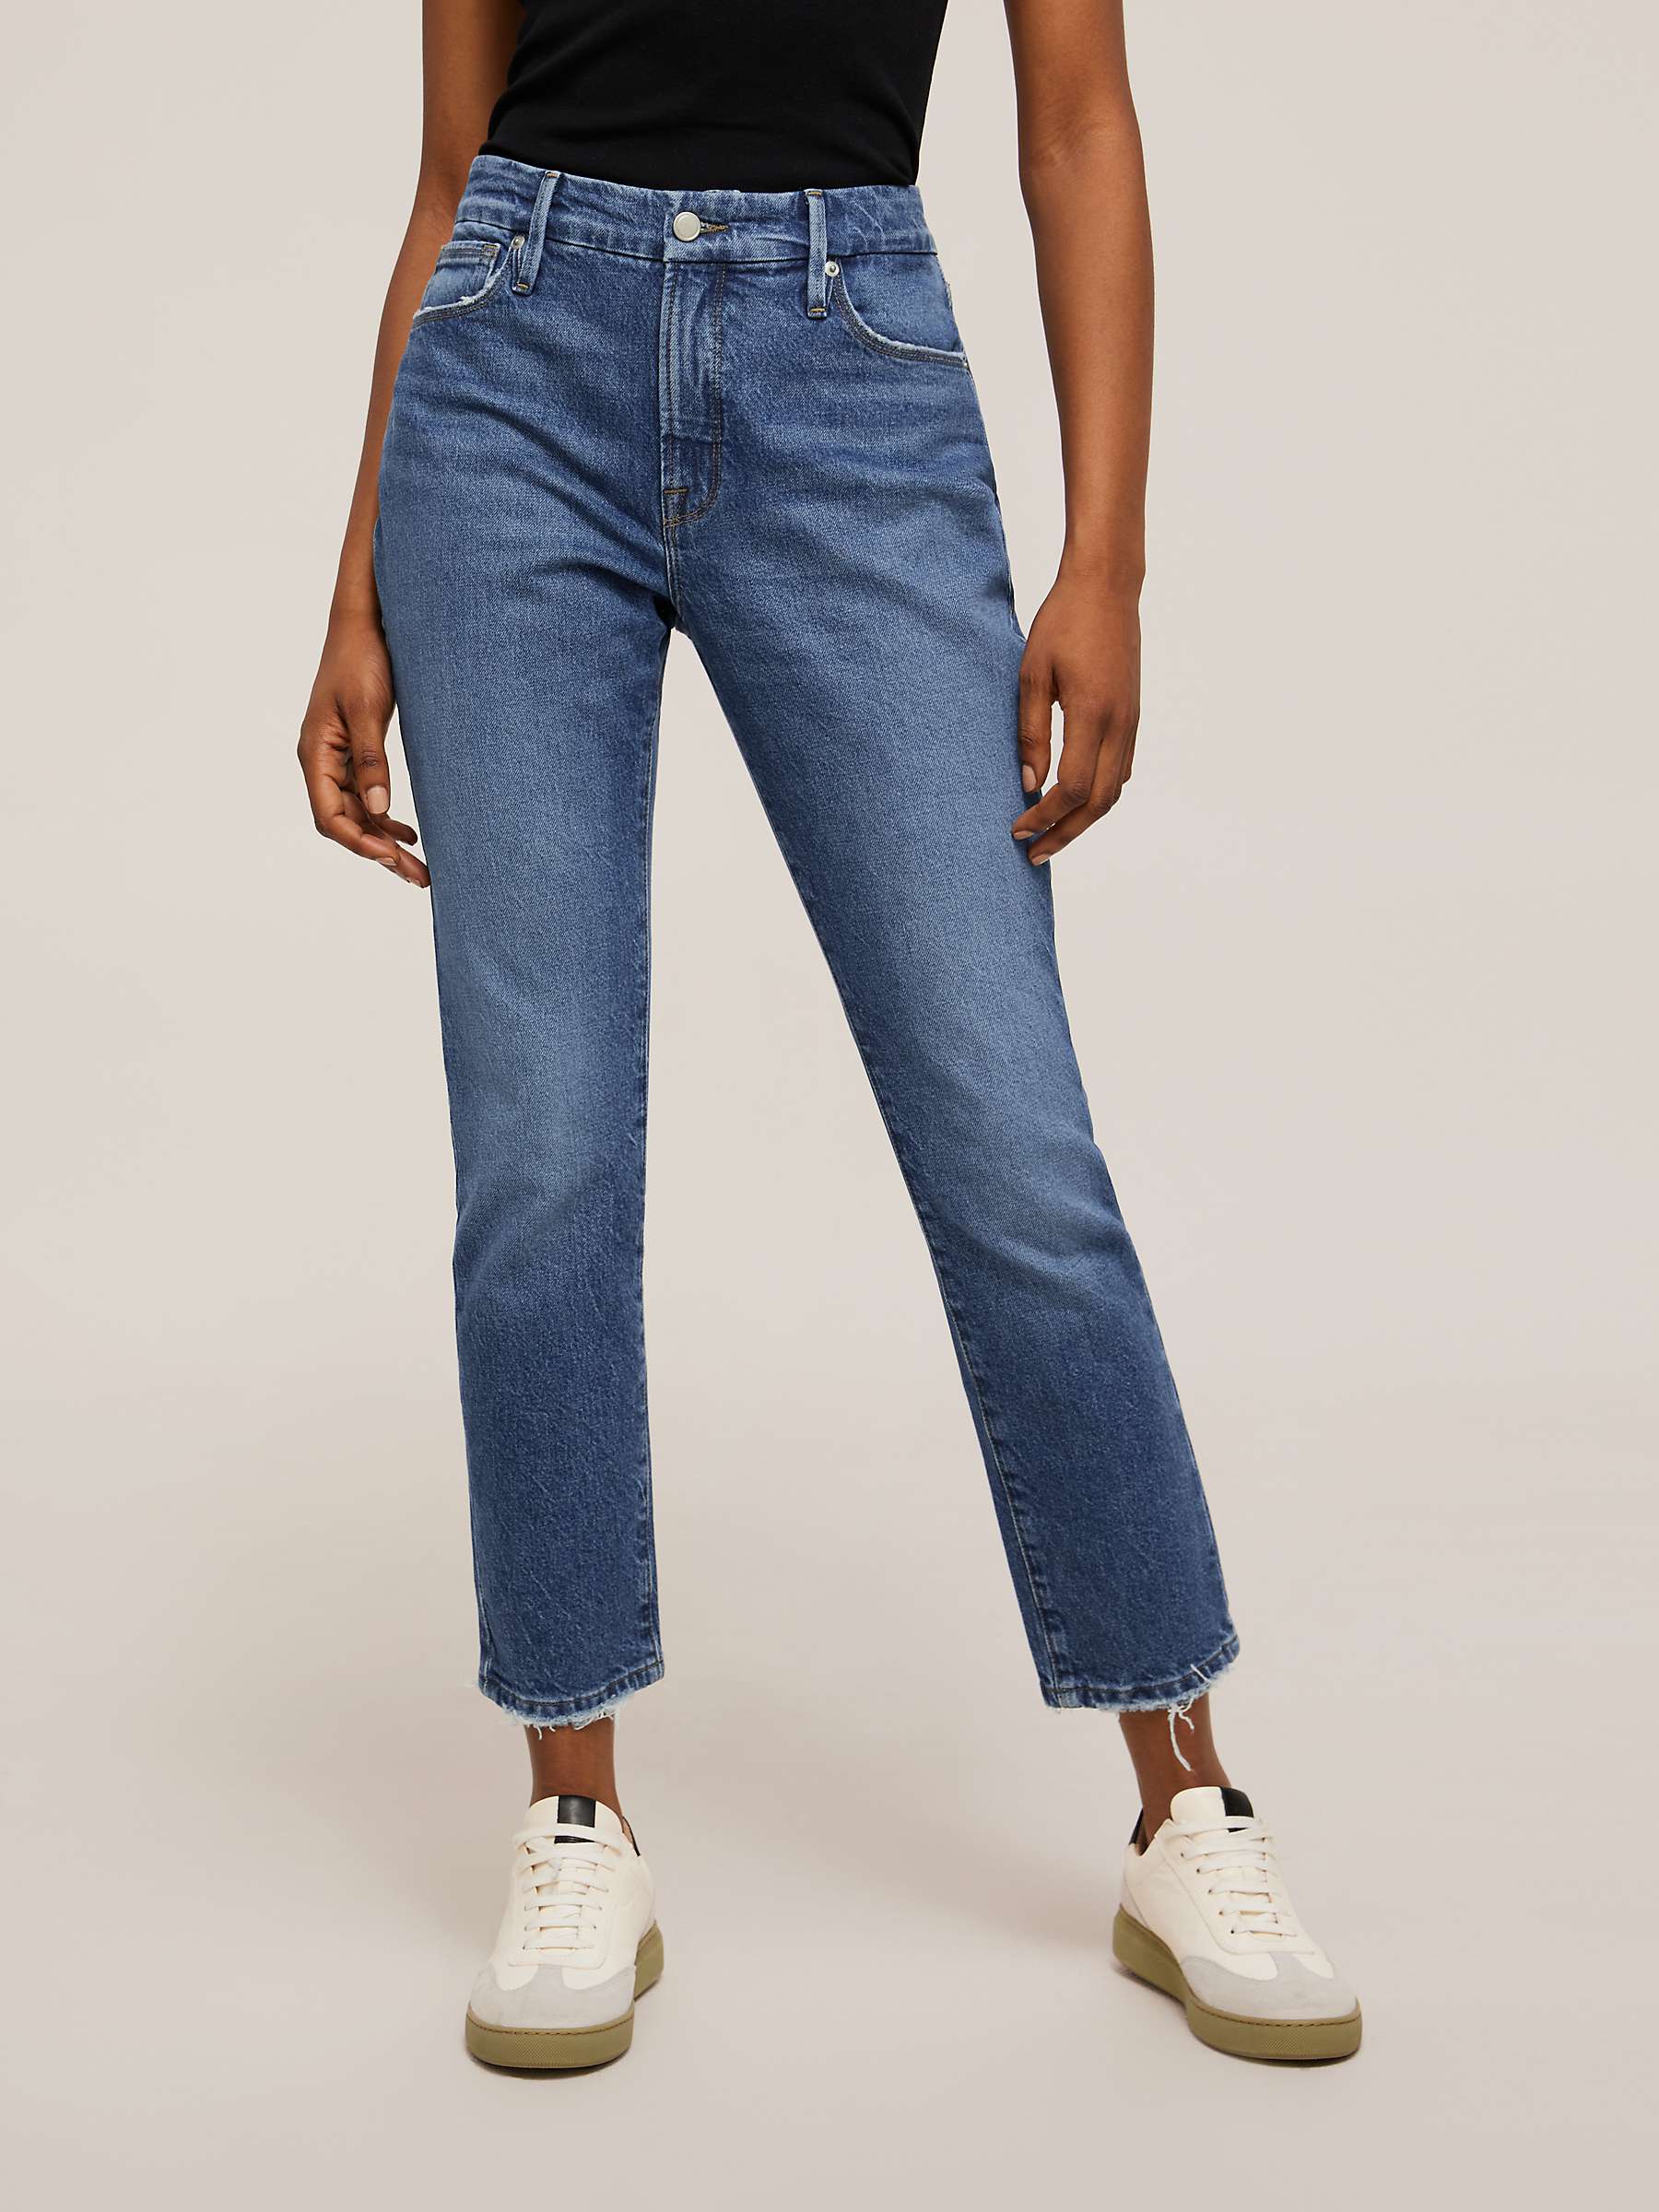 Buy Good American Classic Jeans, Blue Online at johnlewis.com